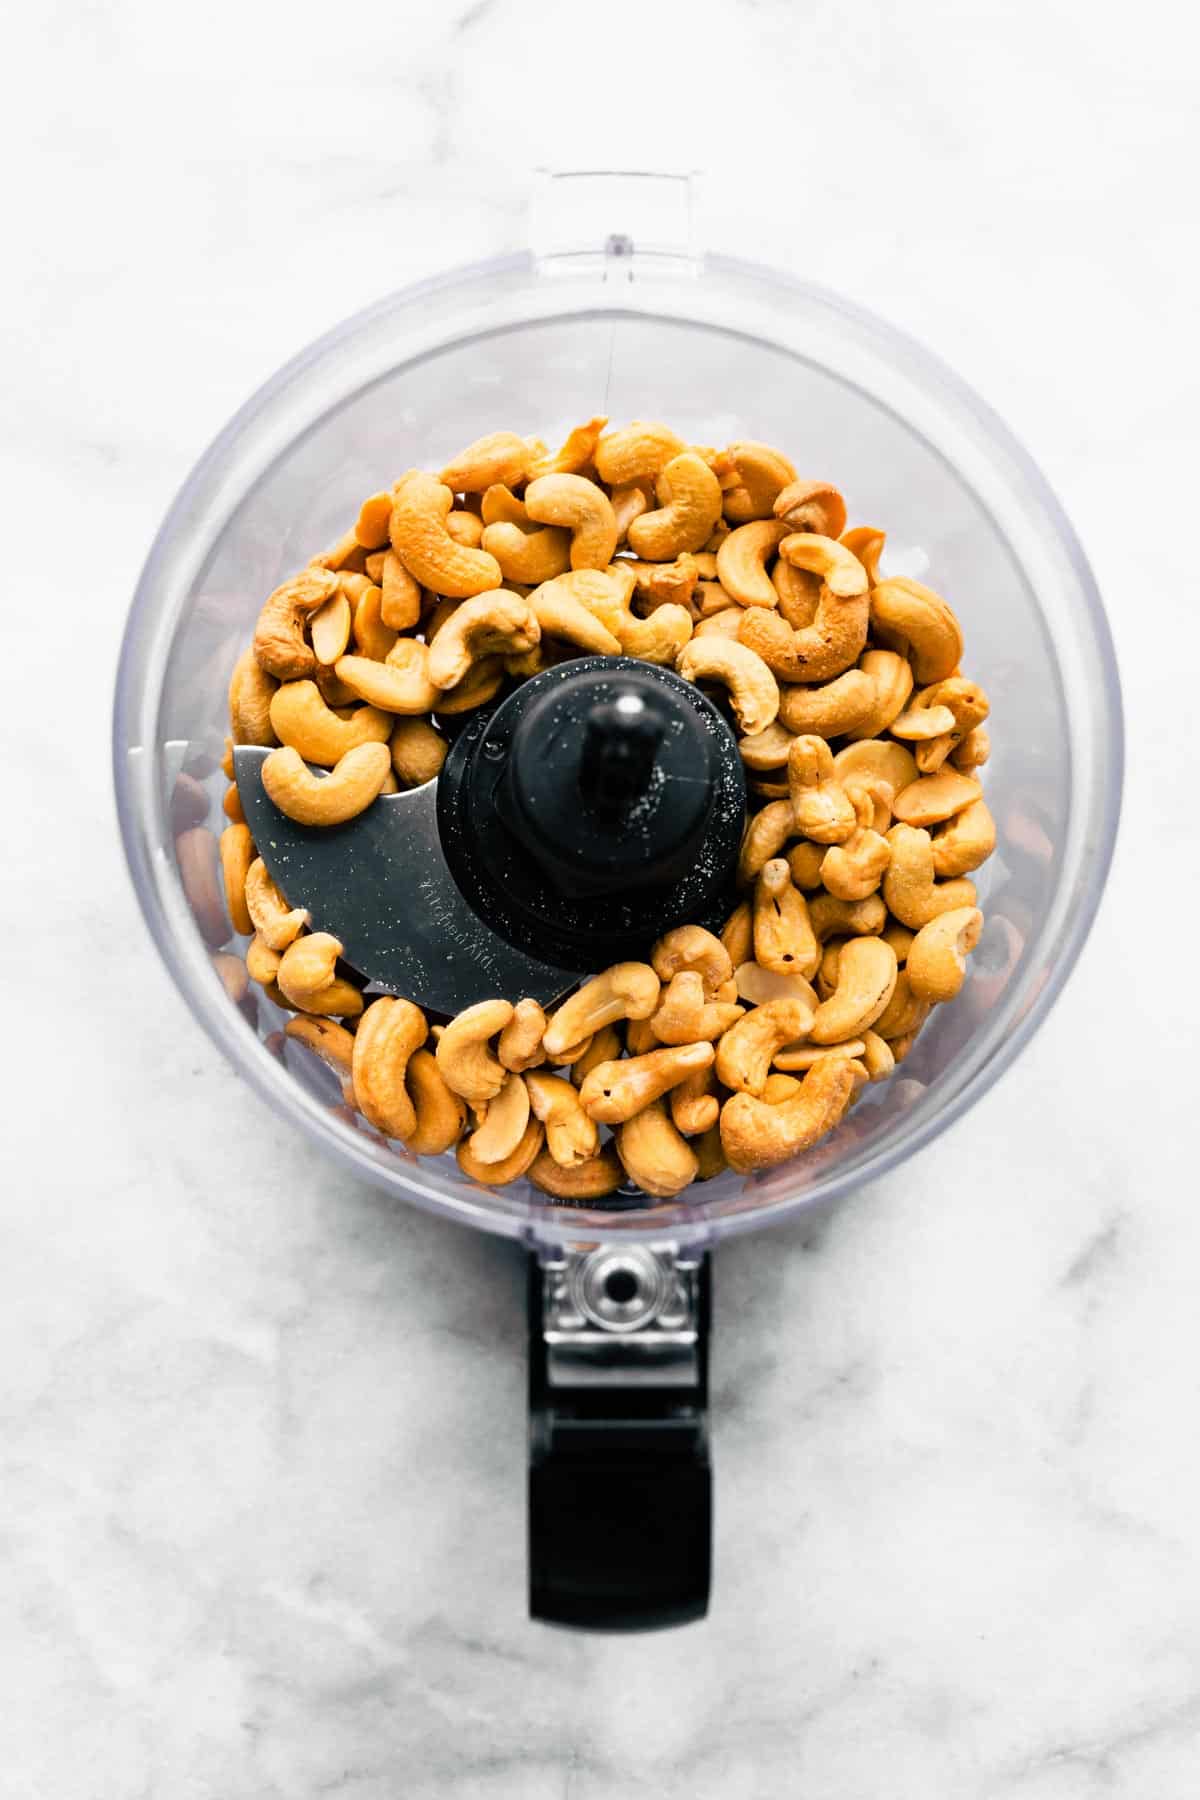 Raw cashews in a food processor ready to be made into vegan cashew butter.